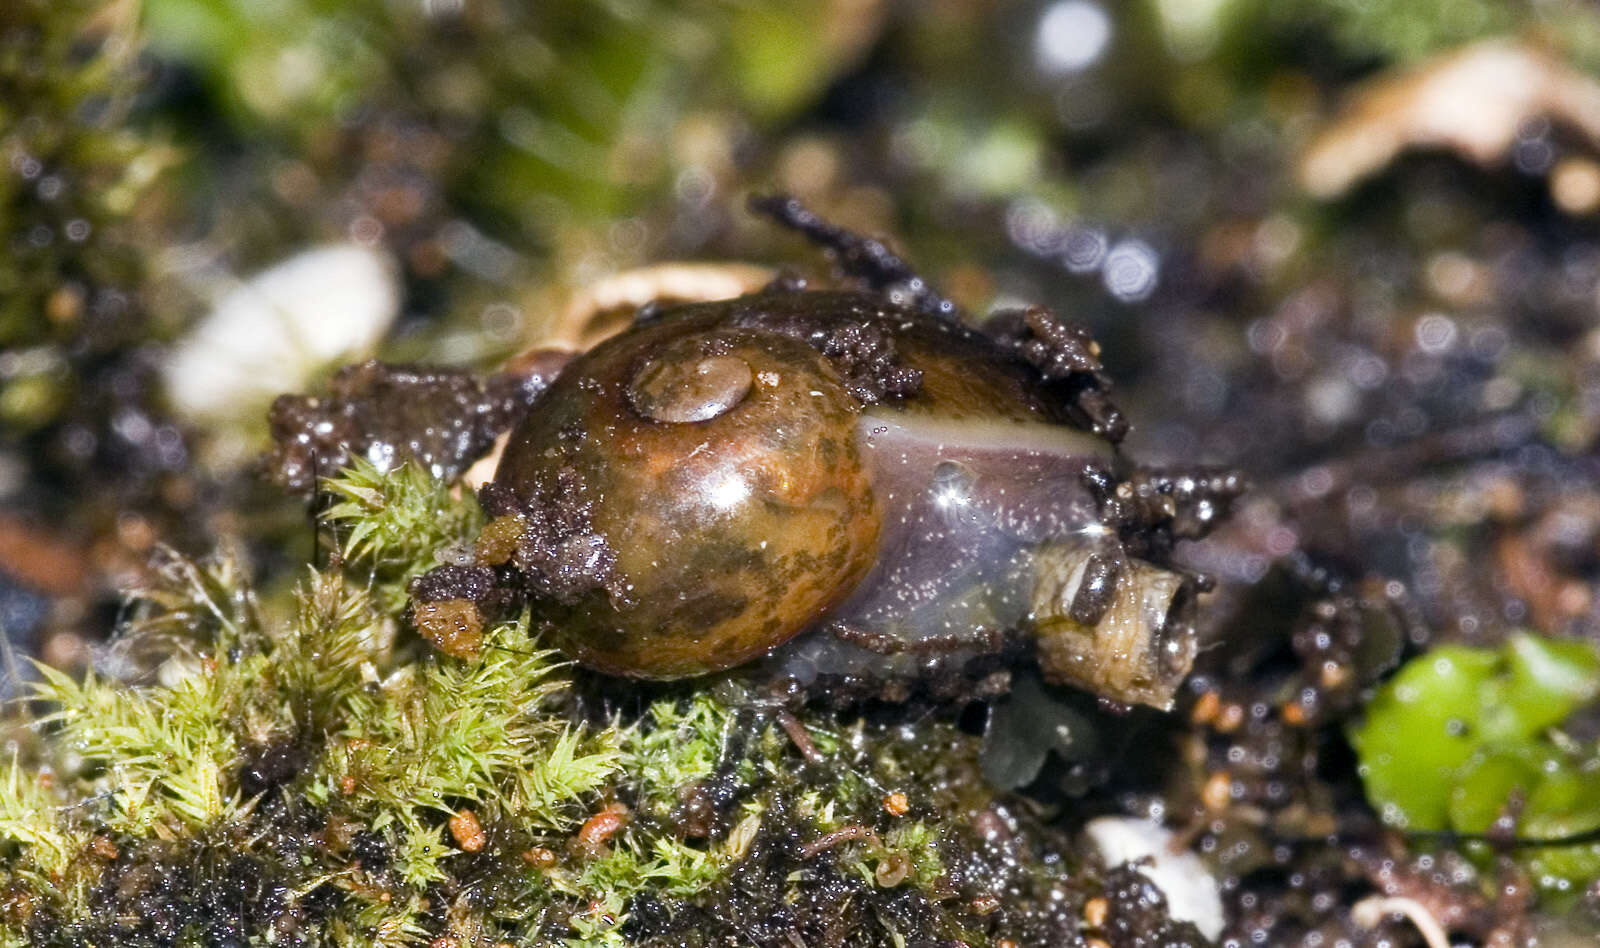 Image of New Zealand microsnails